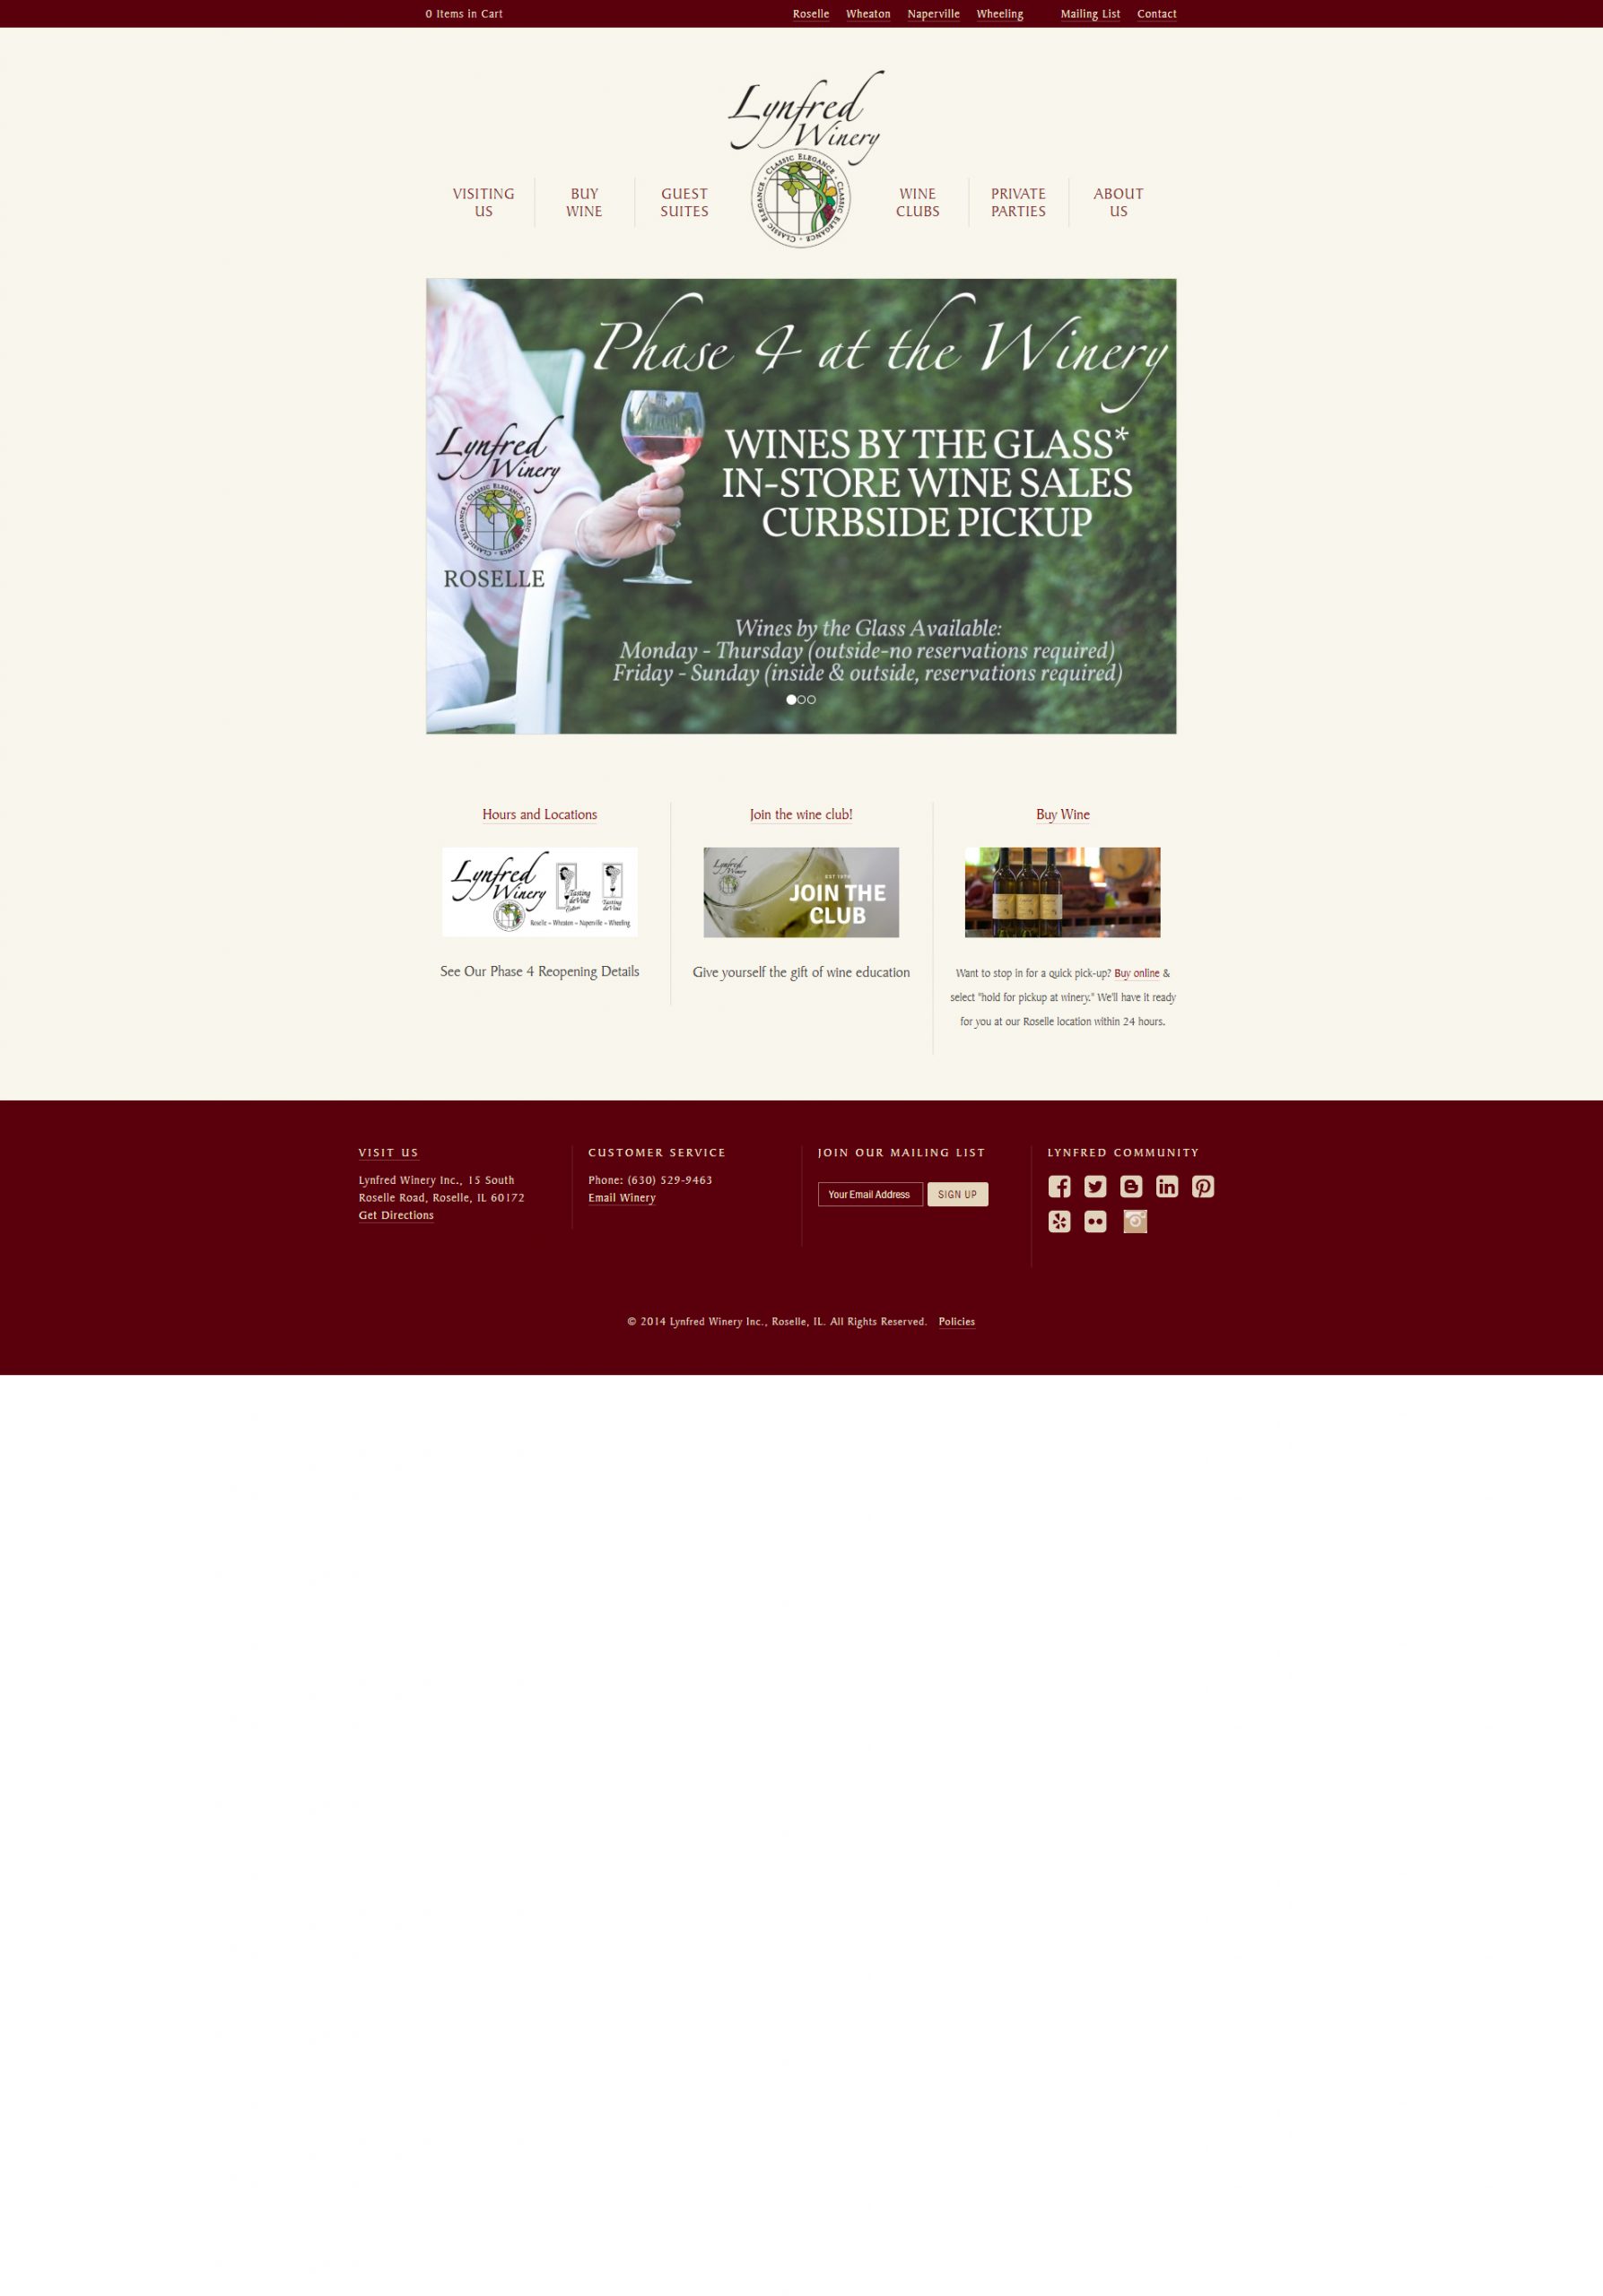 Lynfred Winery Website Redesign - Before